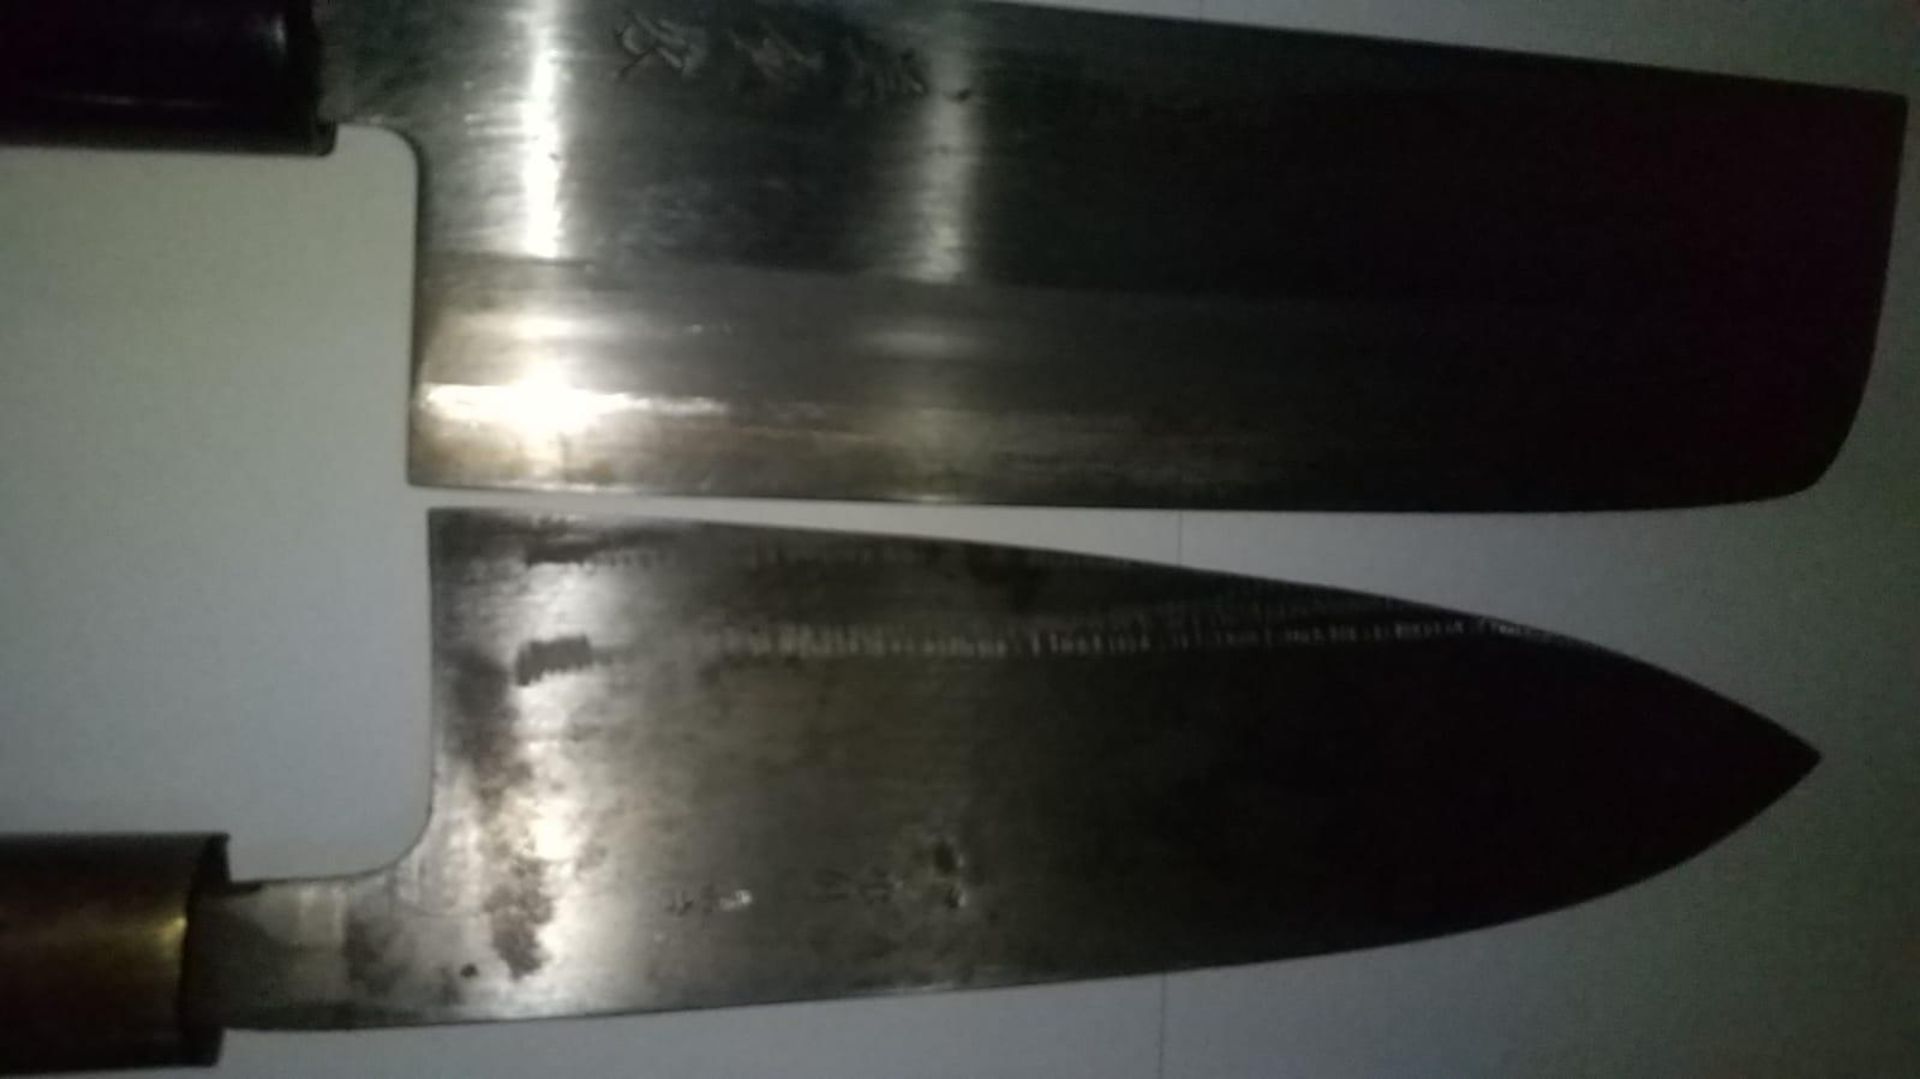 Japanese Chefs knifes set. Four Japanese hand forged Chefs knifes from right signed. SEKI TOSHIN, - Image 3 of 3